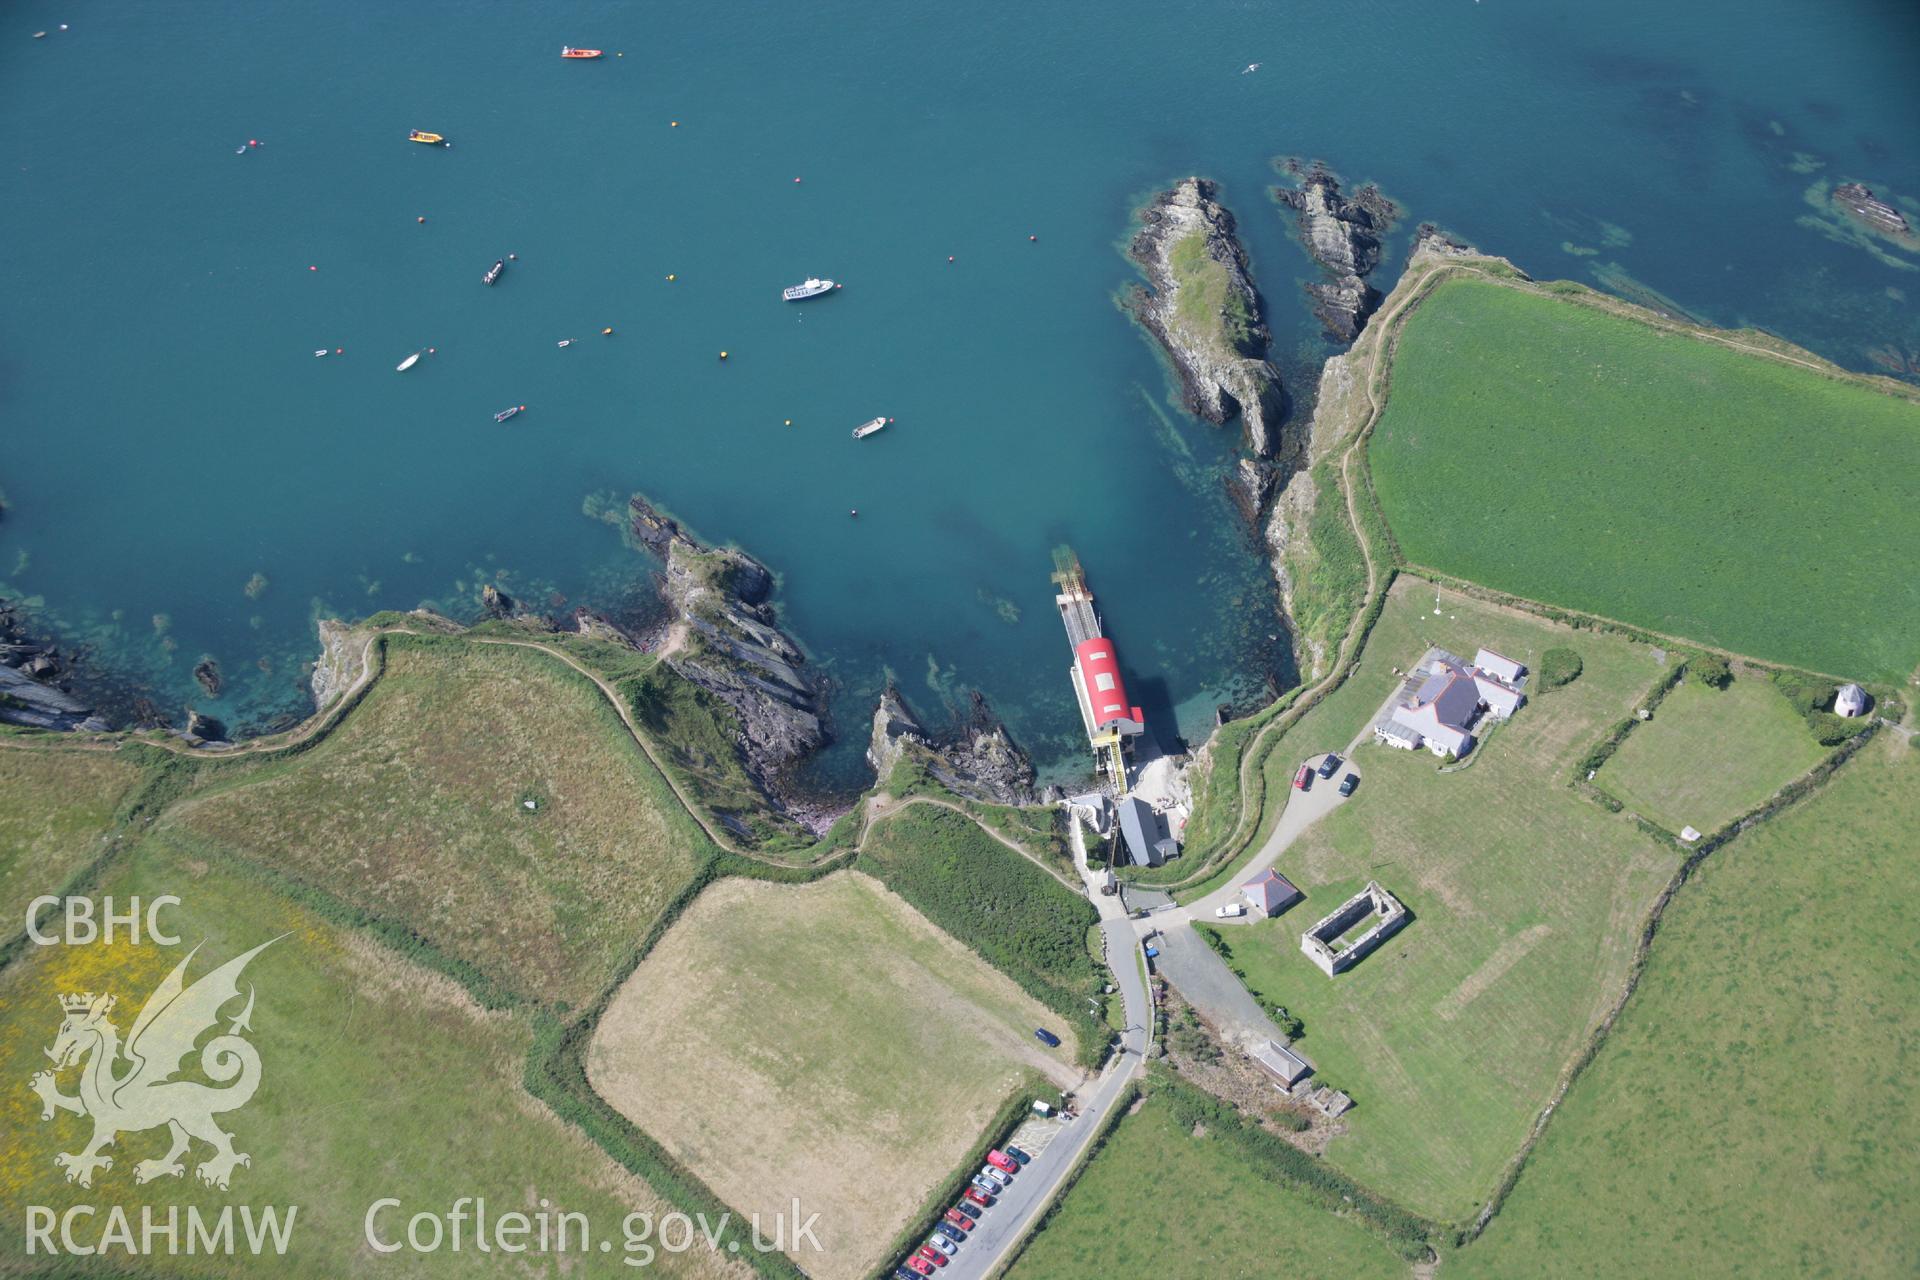 RCAHMW colour oblique aerial photograph of St Davids Lifeboat Station. Taken on 14 July 2006 by Toby Driver.